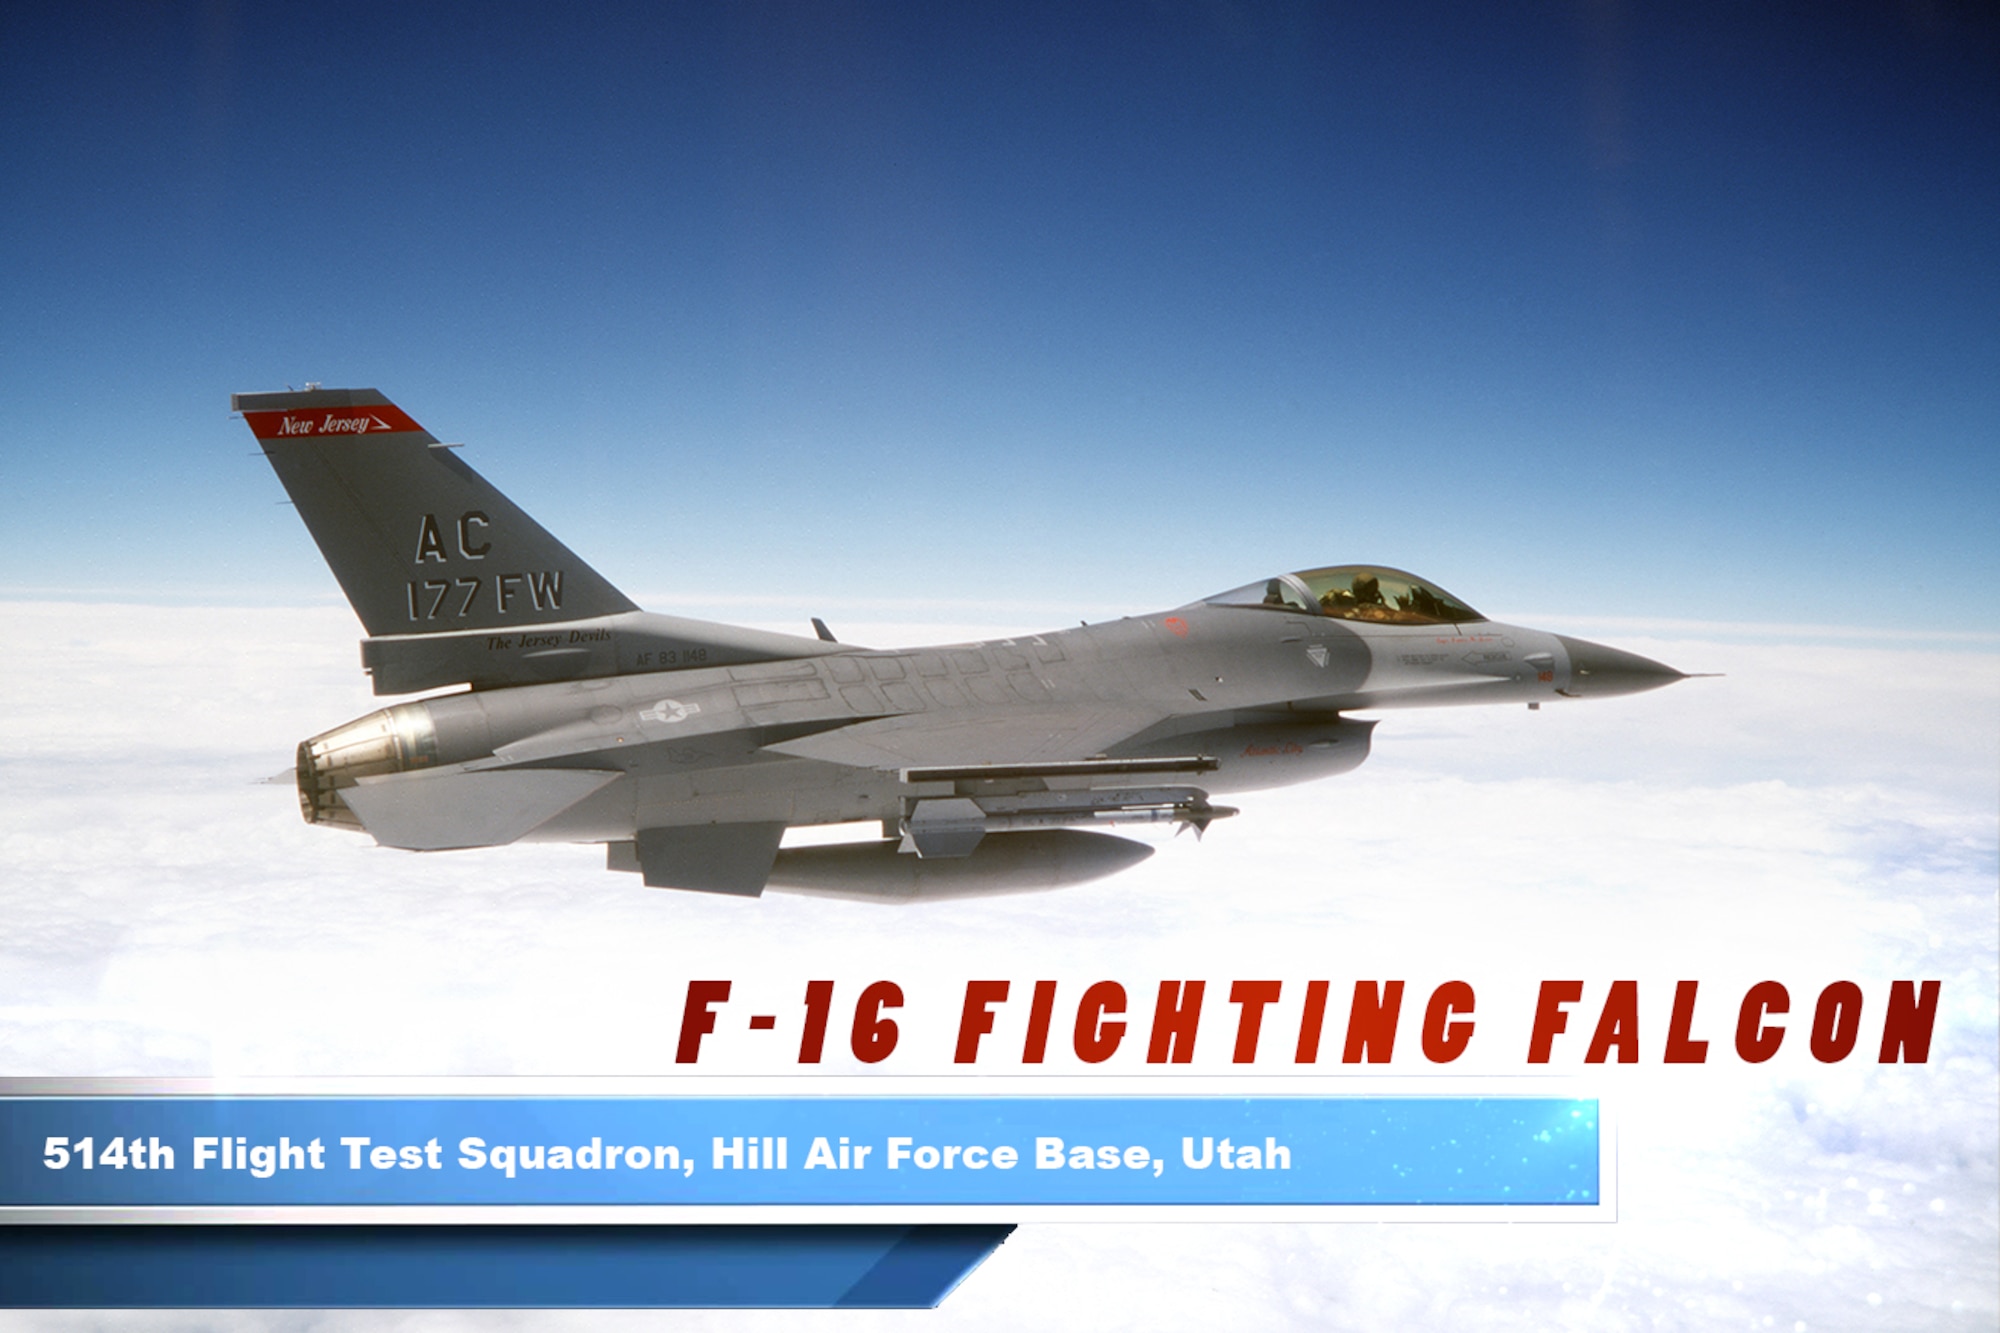 The F-16 Fighting Falcon is a compact, multi-role fighter aircraft. It is highly maneuverable and has proven itself in air-to-air combat and air-to-surface attack. It provides a relatively low-cost, high-performance weapon system for the United States and allied nations.